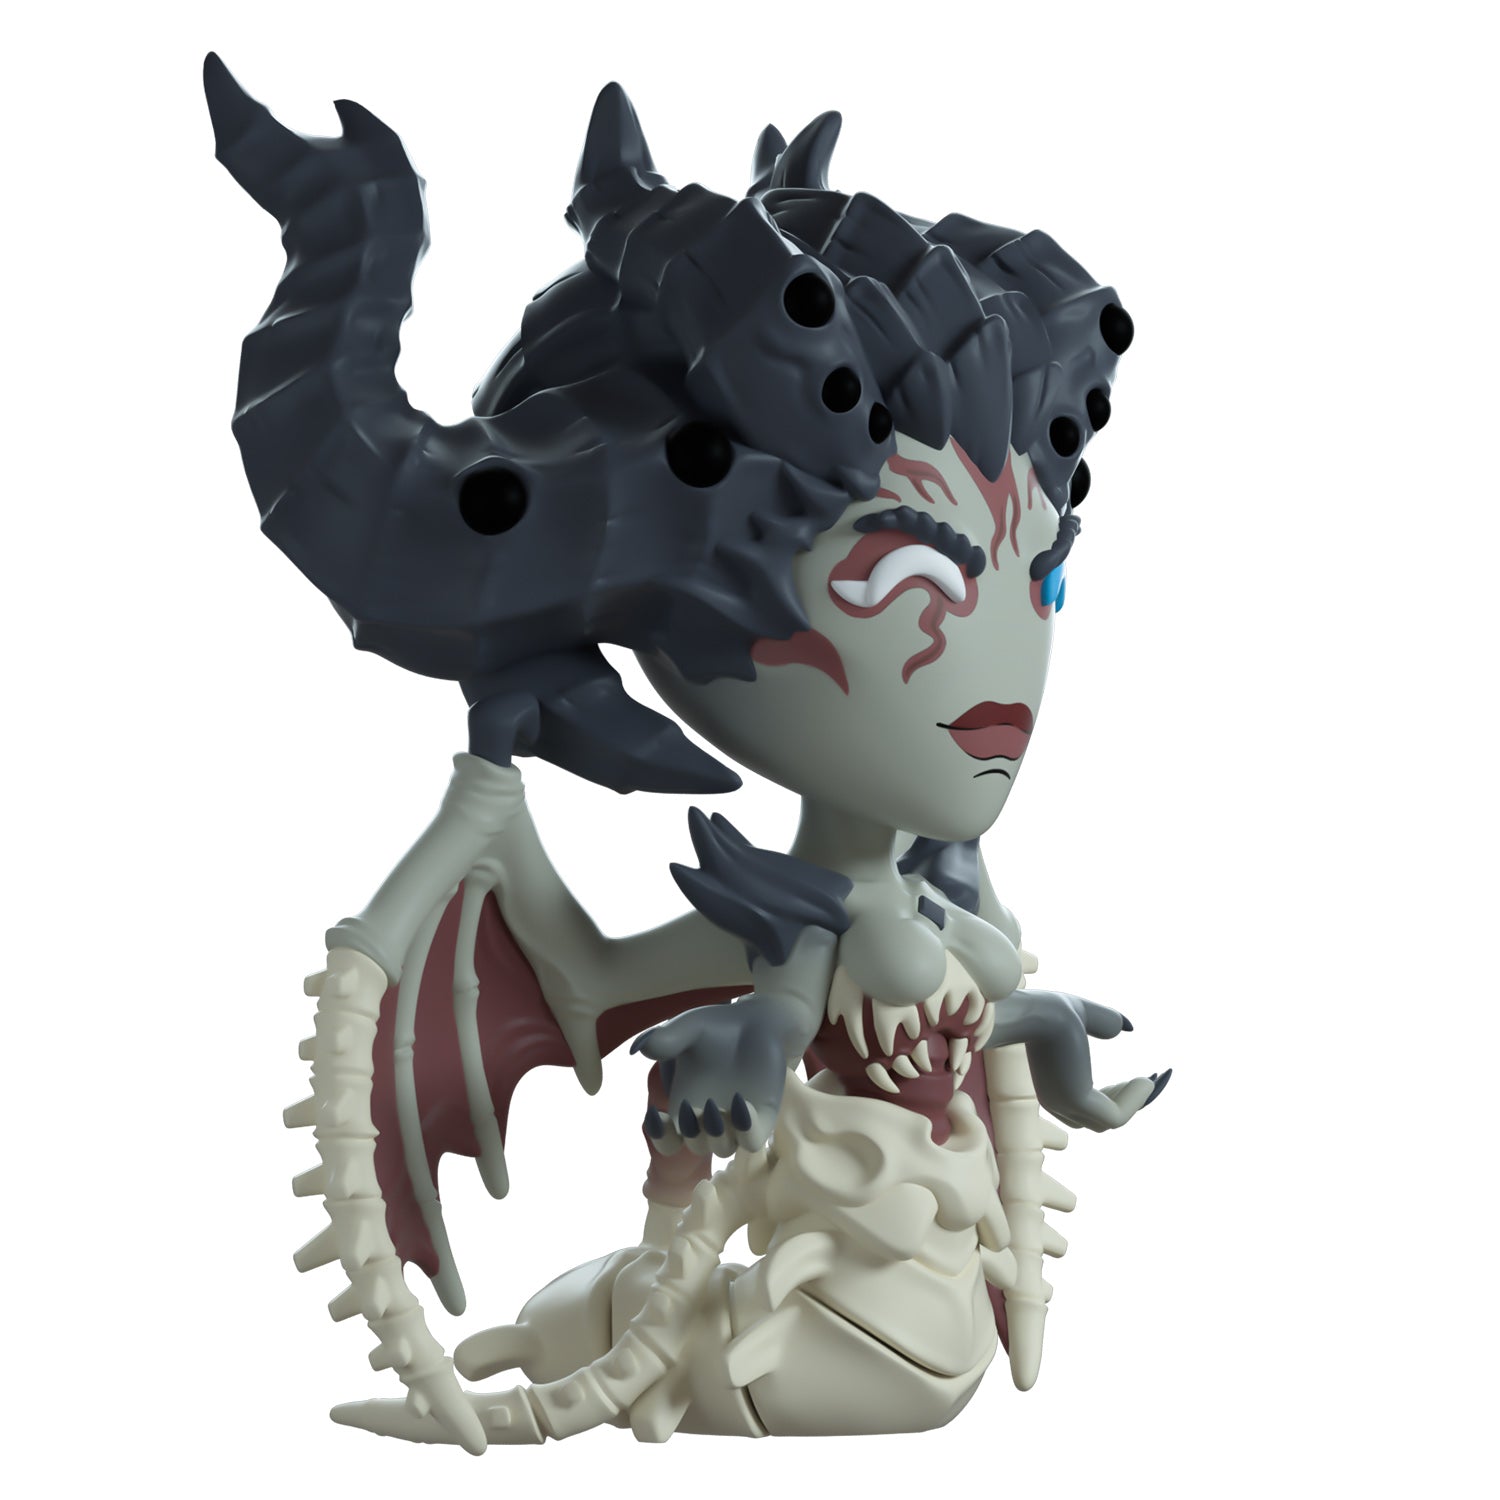 Diablo IV Lilith Youtooz Figurine - Front Right Side View